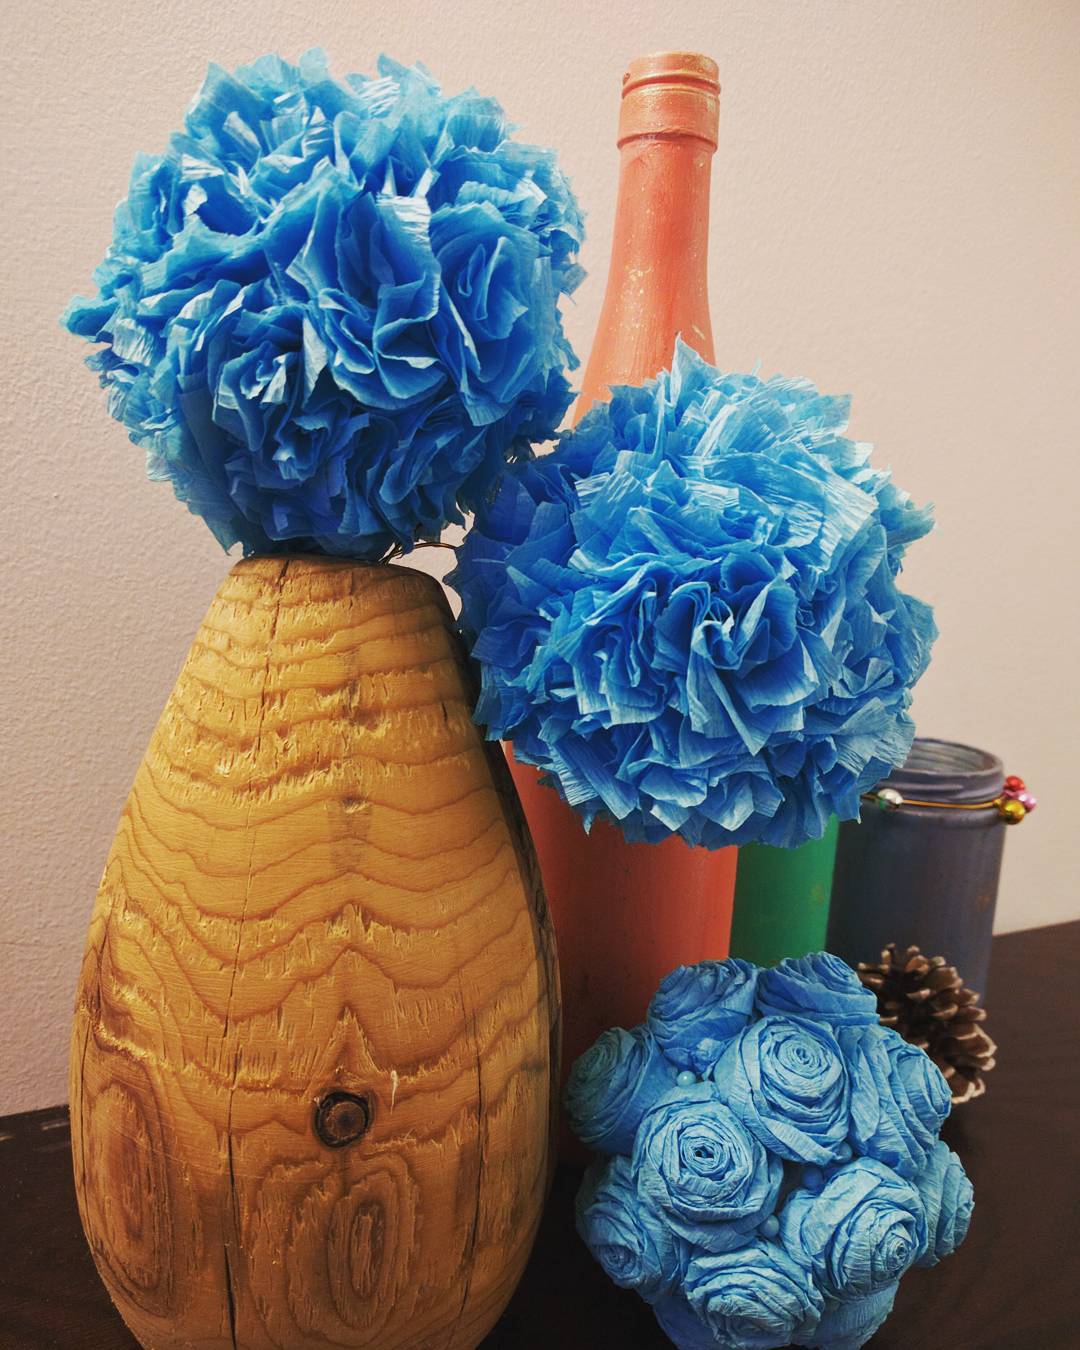 wood turned vase with paper flowers